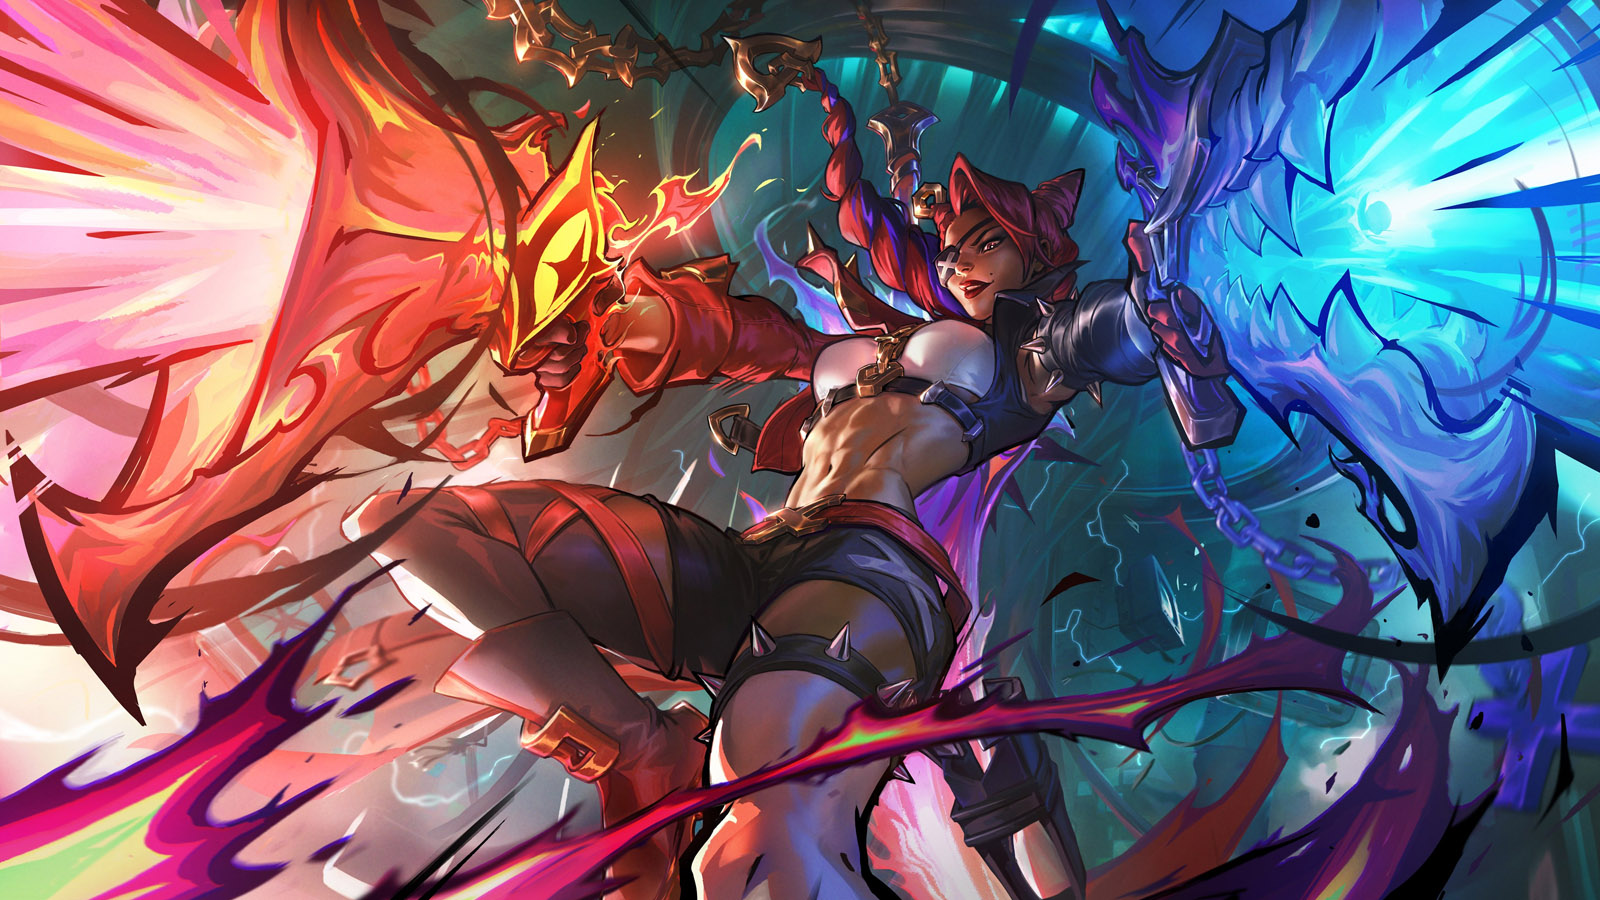 League of Legends Soul Fighter occasion 2023: Dates, missions, go, value